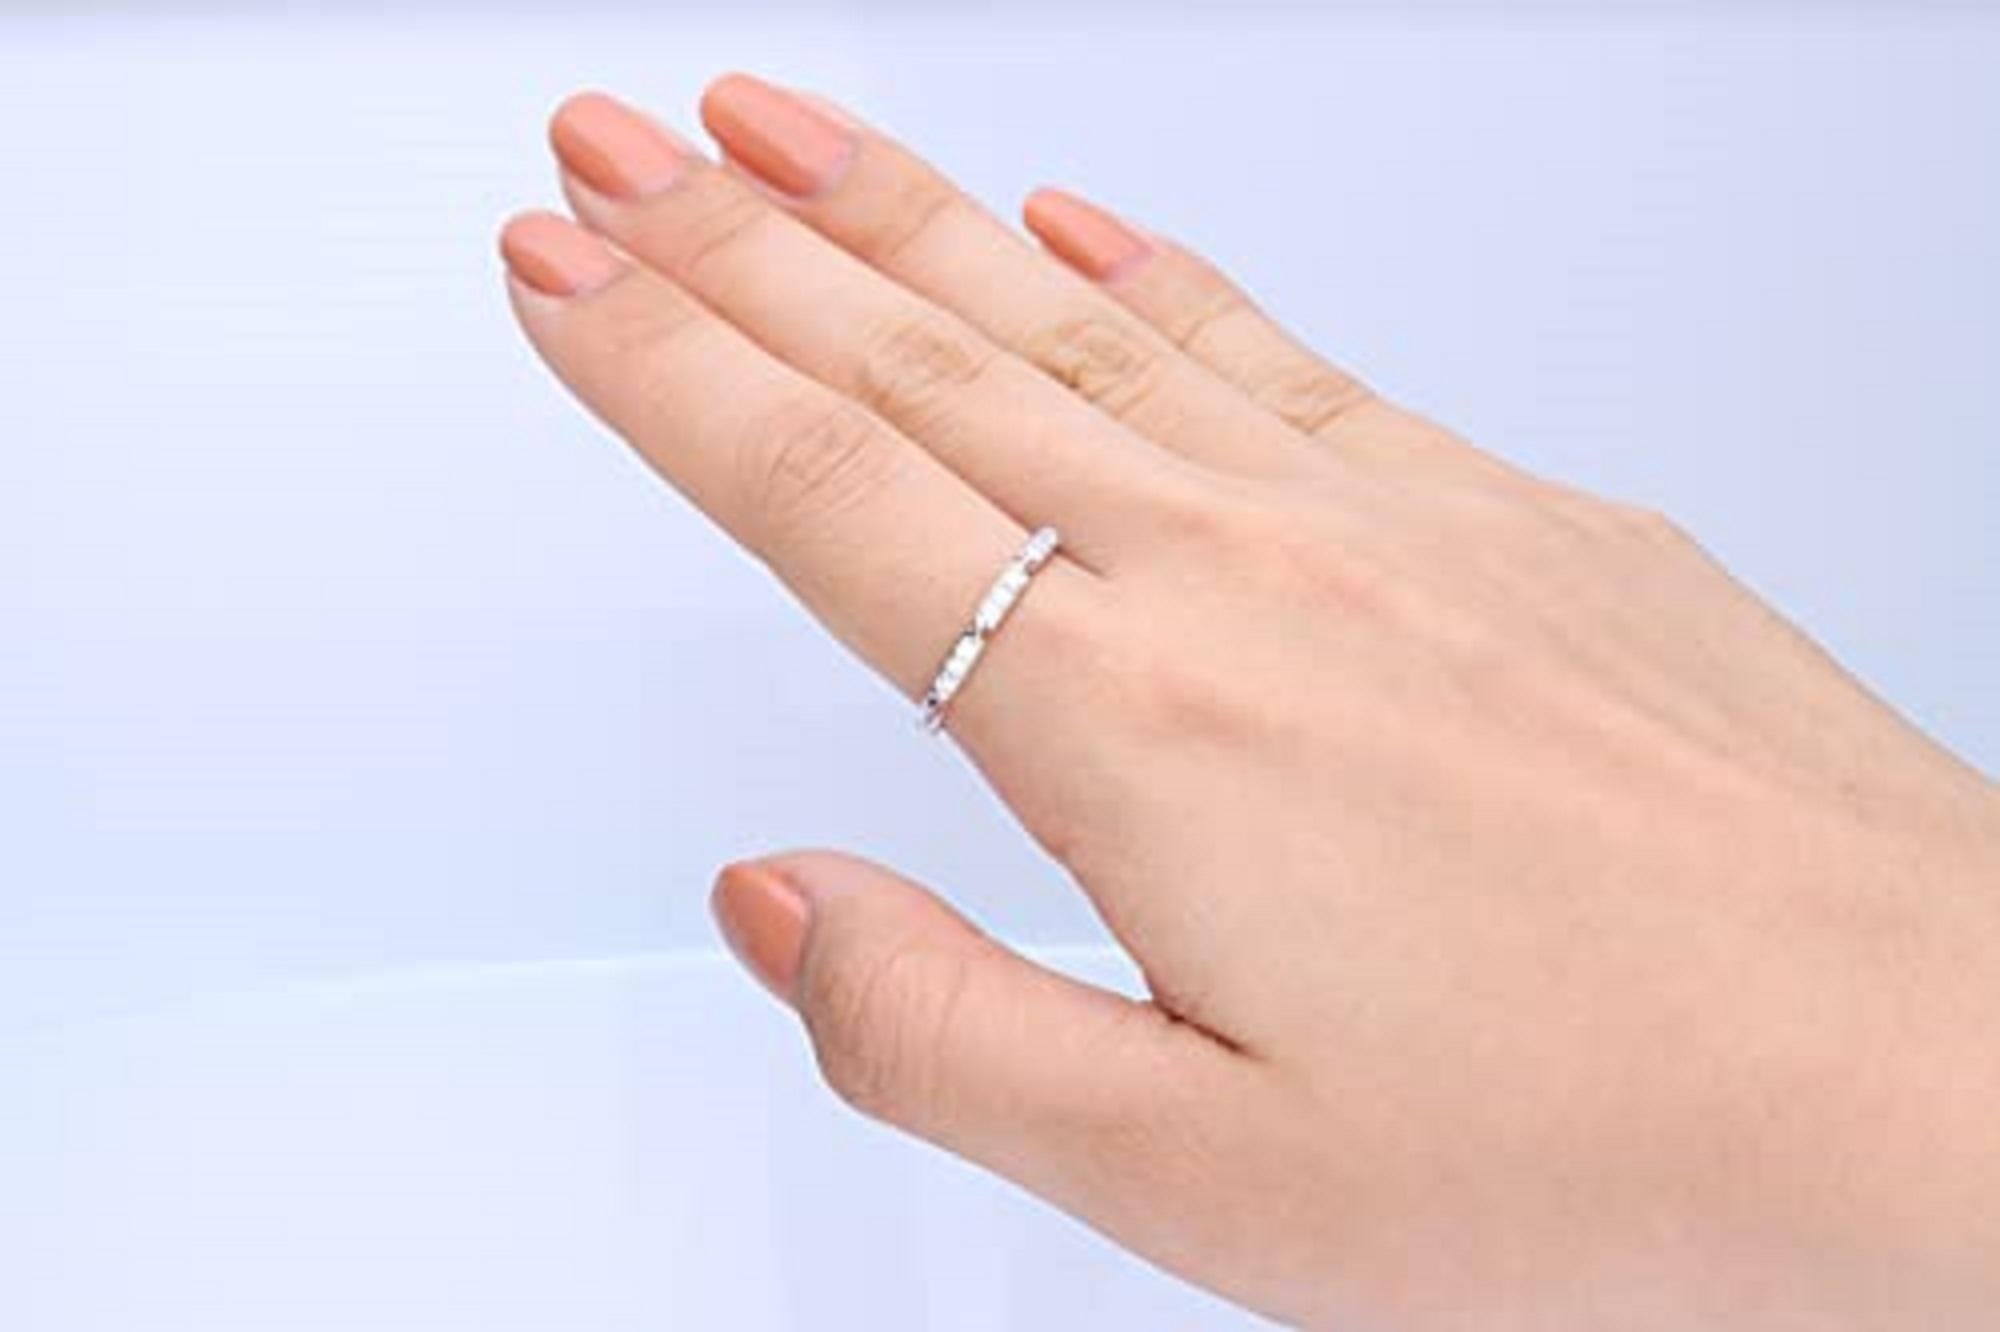 Decorate yourself in elegance with this Ring is crafted from 14-karat White Gold by Gin & Grace. This Ring is made up of Round-cut Prong-Setting White Diamond (15 Pcs) 0.32 Carat . This Ring is weight 1.82 grams. This delicate Ring is polished to a